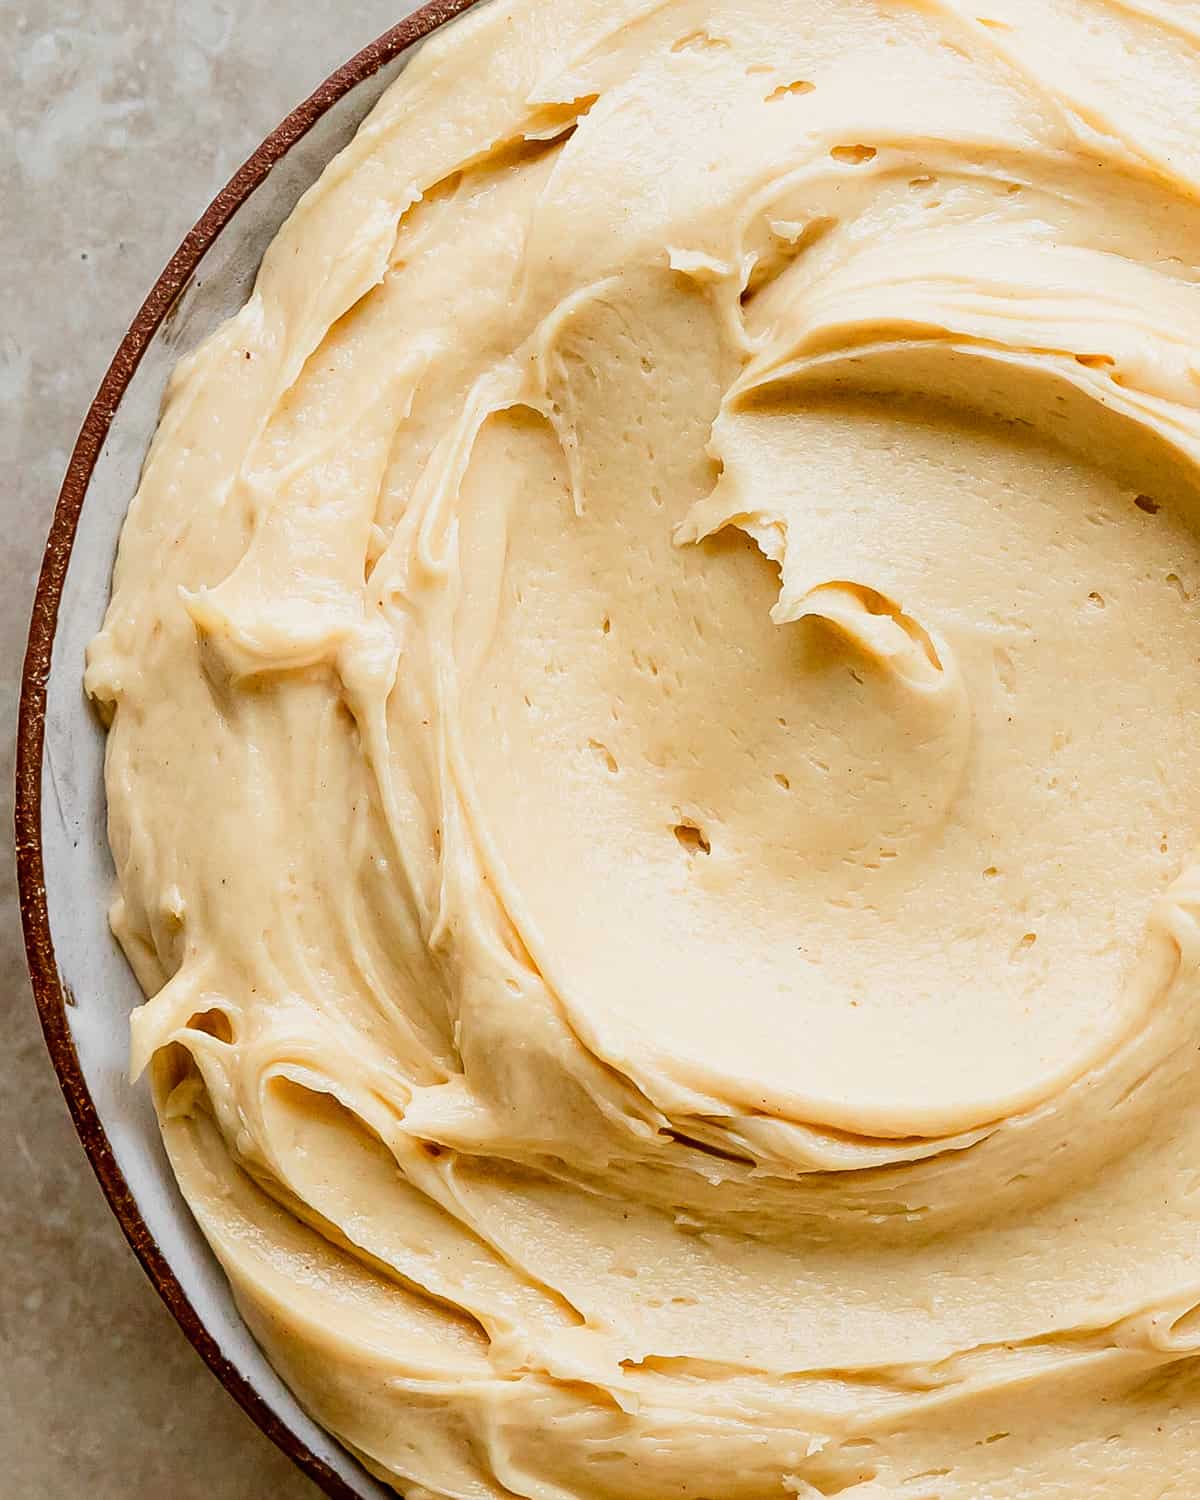 Peanut butter frosting is a rich, creamy, nutty and slightly tangy peanut butter icing. This peanut butter frosting with cream cheese is easy to make, using just a handful of ingredients. This recipe makes the perfect peanut butter frosting for cookies, cakes, cupcakes or to enjoy by the spoonful. 